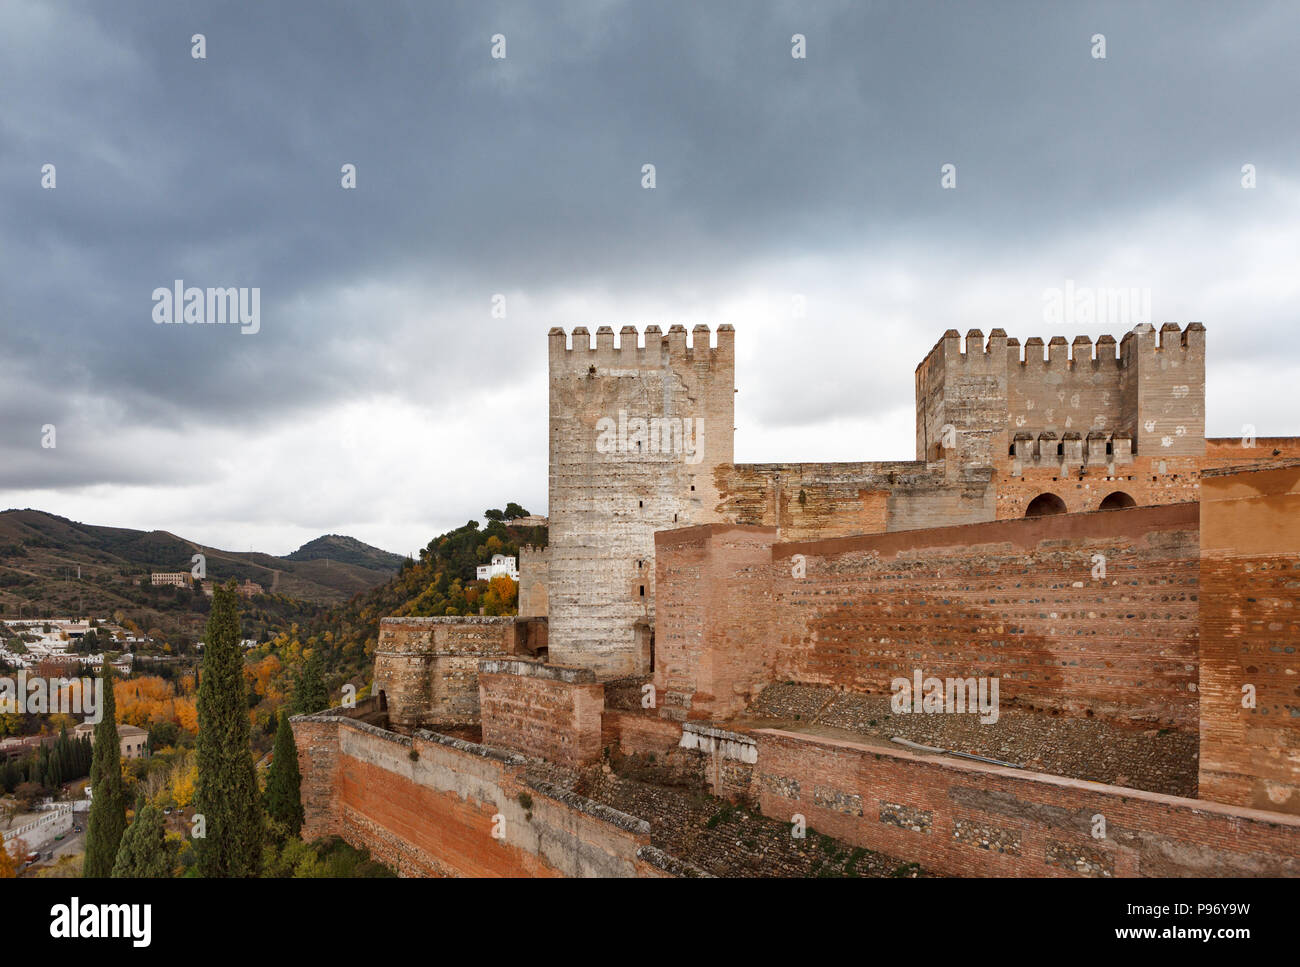 Landscape Alcazaba of Alhambra in Granada, Andalusia, Spain. Without people Stock Photo